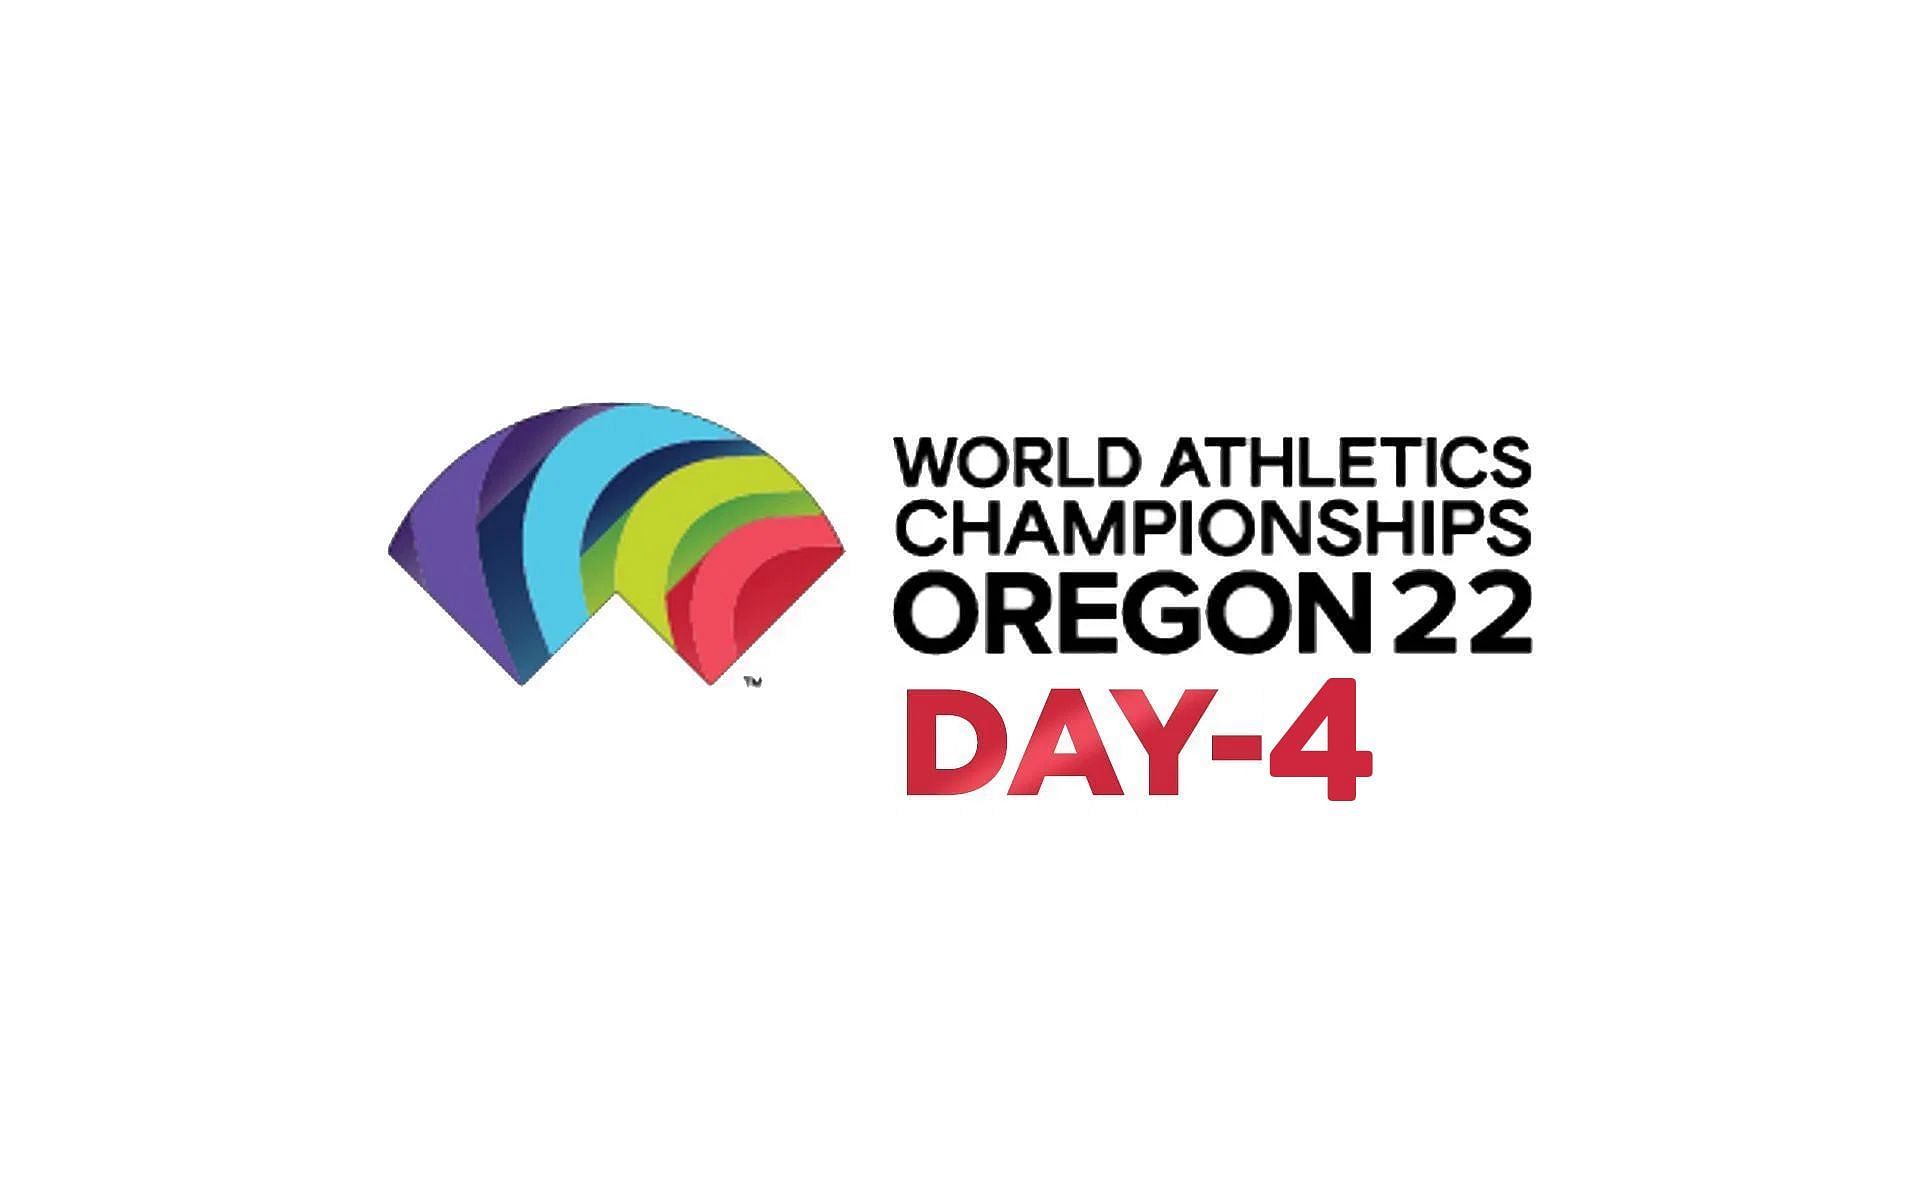 World Athletics Championships 2022 Day 4 schedule Events, timings, live stream links, and more